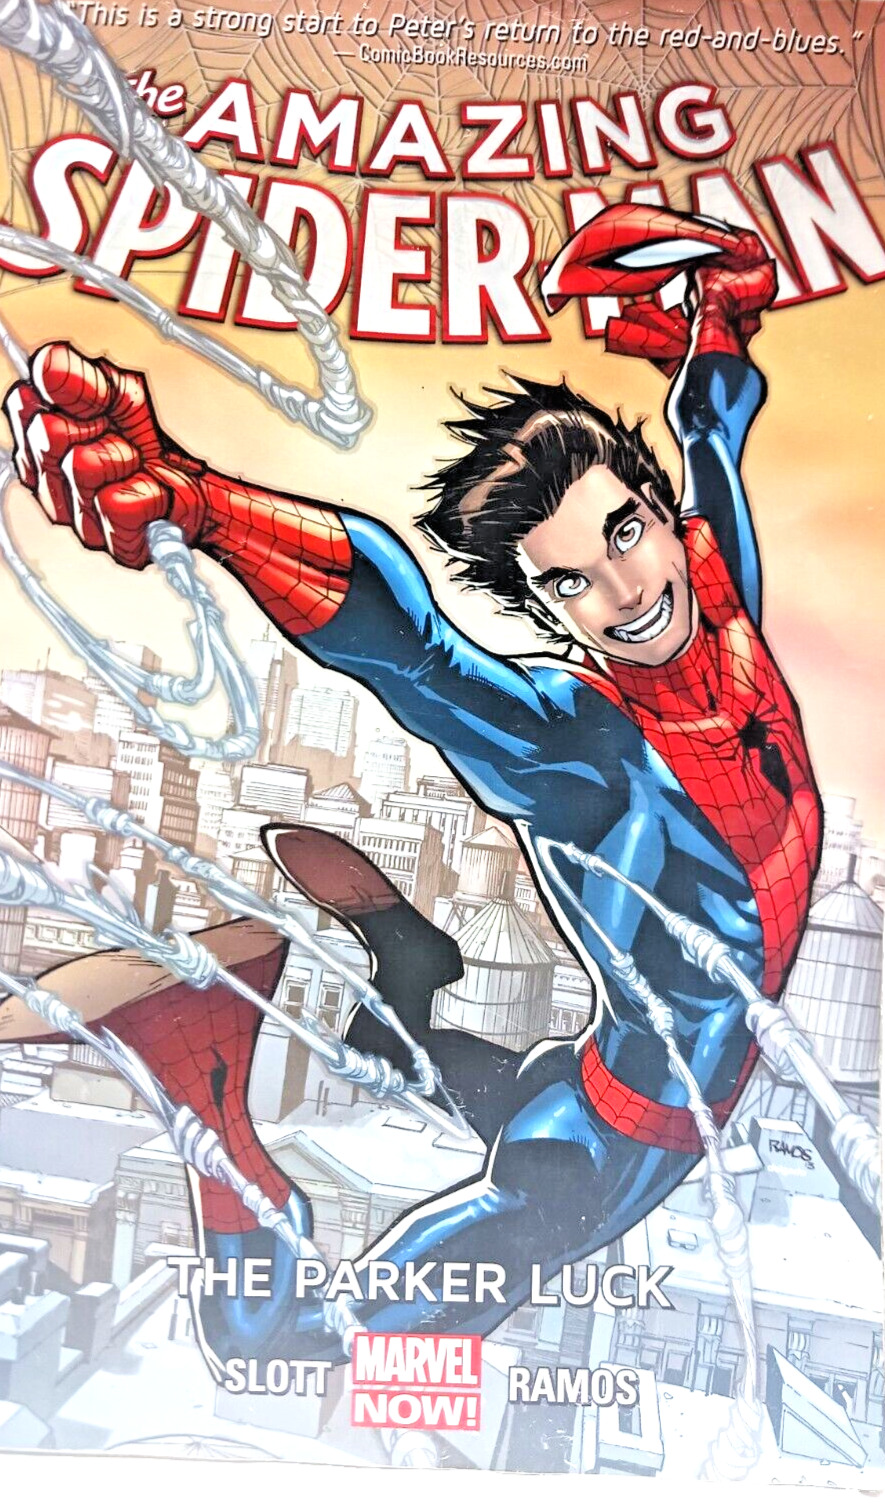 Amazing Spider-man Volume 1: The Parker Luck by Humberto Ramos